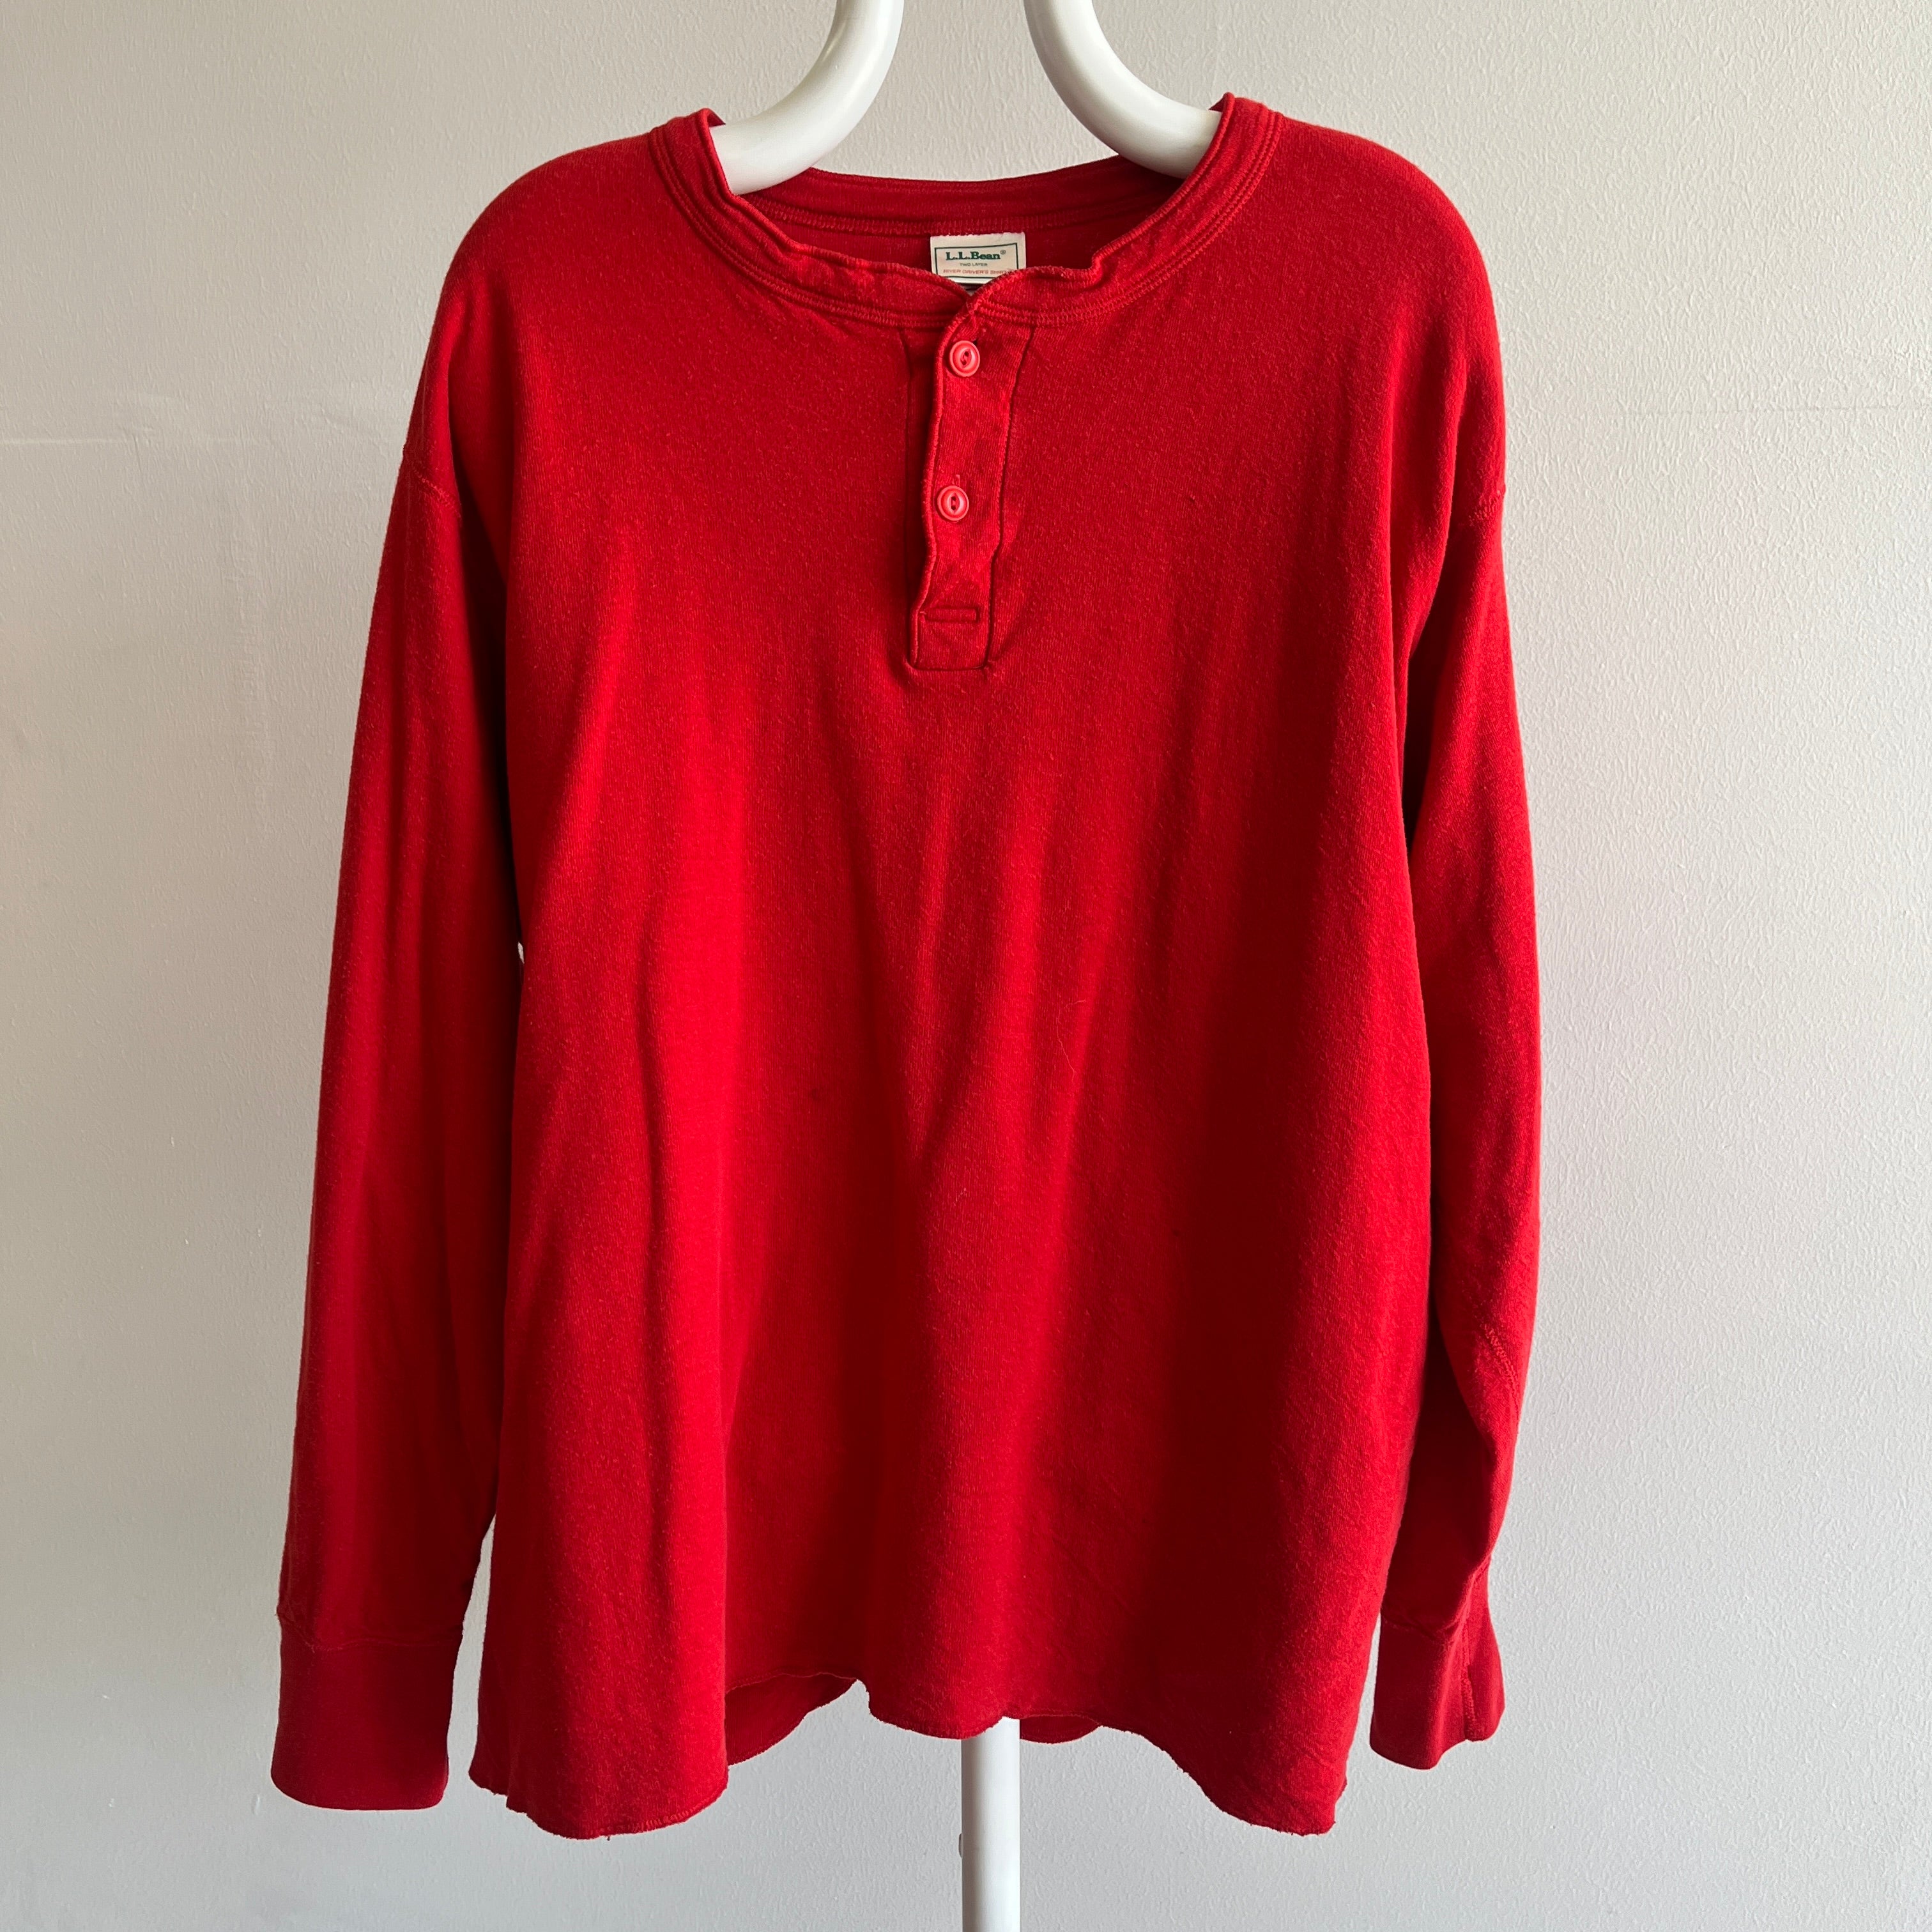 1990s USA Made L.L. Bean Soft and Cozy Henley